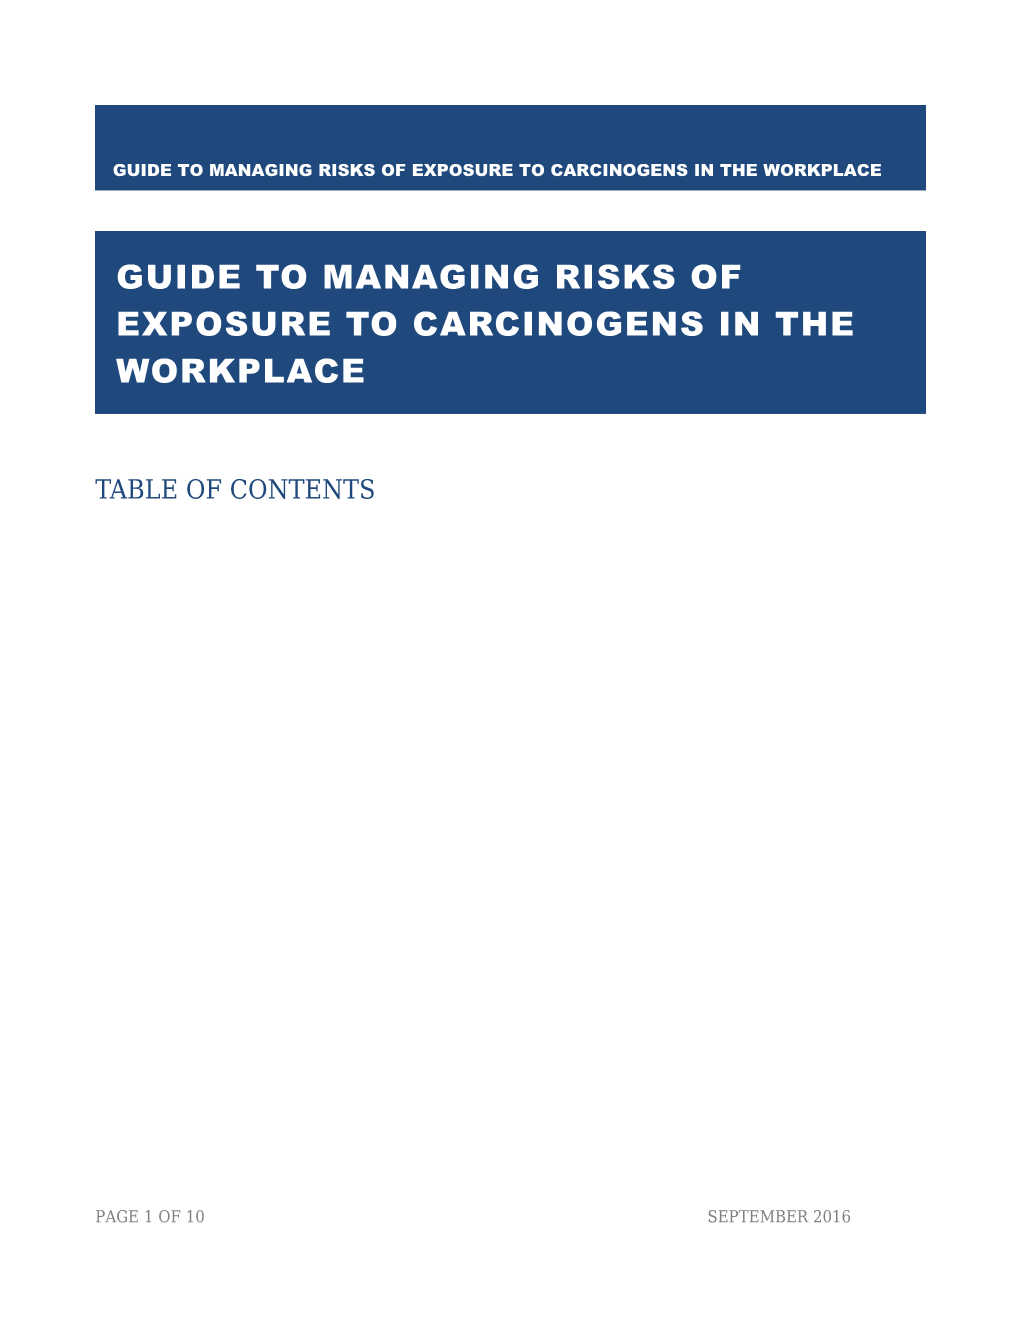 Guide to Managing Risks of Exposure to Carcinogens in the Workplace